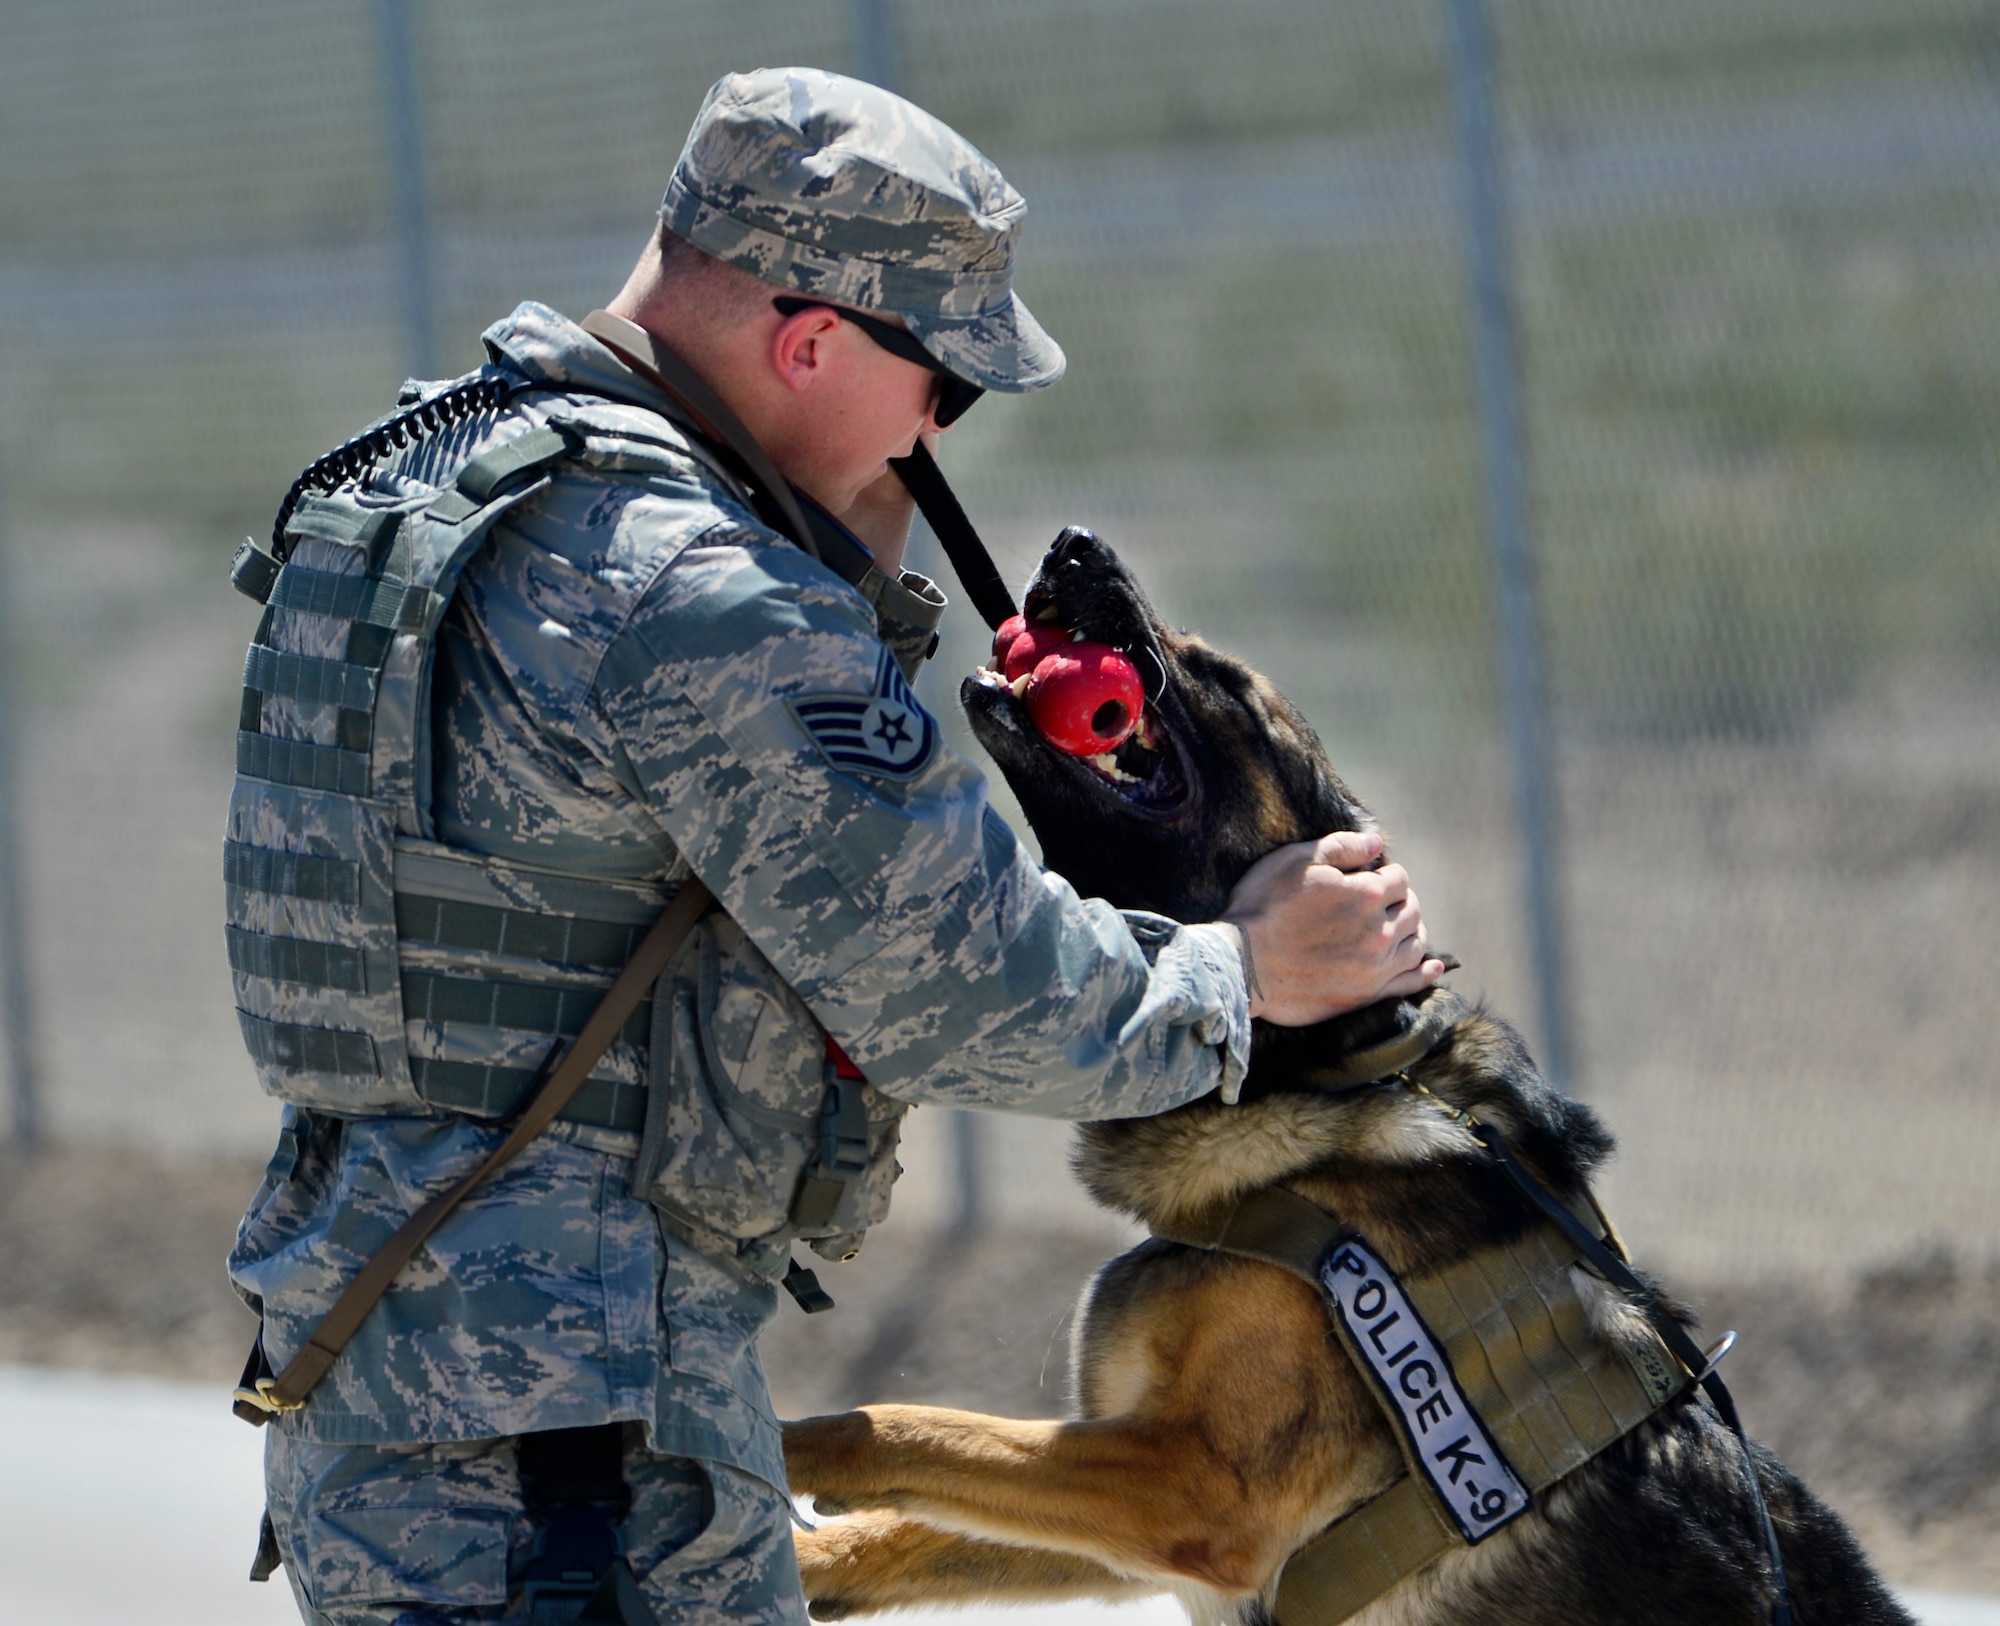 Staff Sgt. John, 799th Security Forces Squadron military working dog handler, rewards MWD Toby after finding contraband during a training exercise May 11, 2016, at Creech Air Force Base, Nevada. National Police Week takes place annually to honor the service and sacrifice of civilian and military law enforcement members. (U.S. Air Force photo by Senior Airman Christian Clausen/Released)